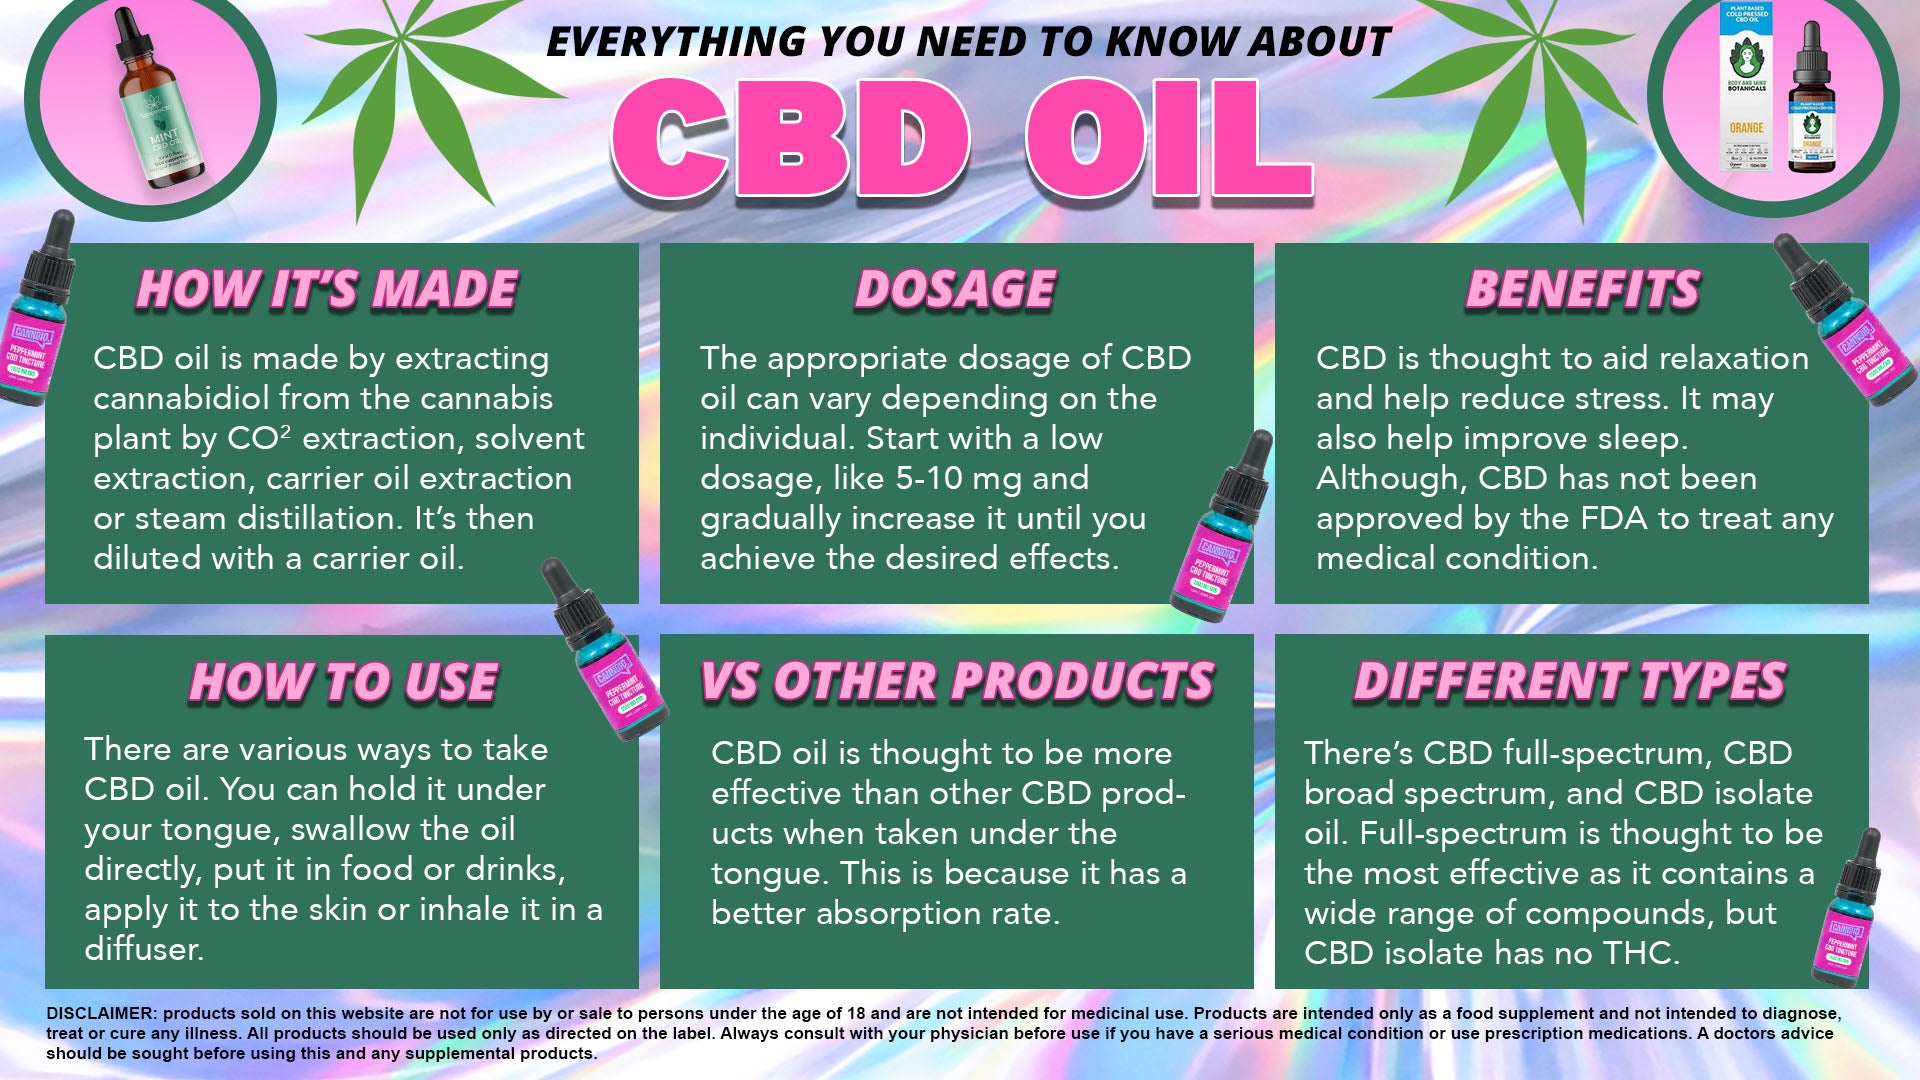 WHY IS CBD OIL SO EXPENSIVE?